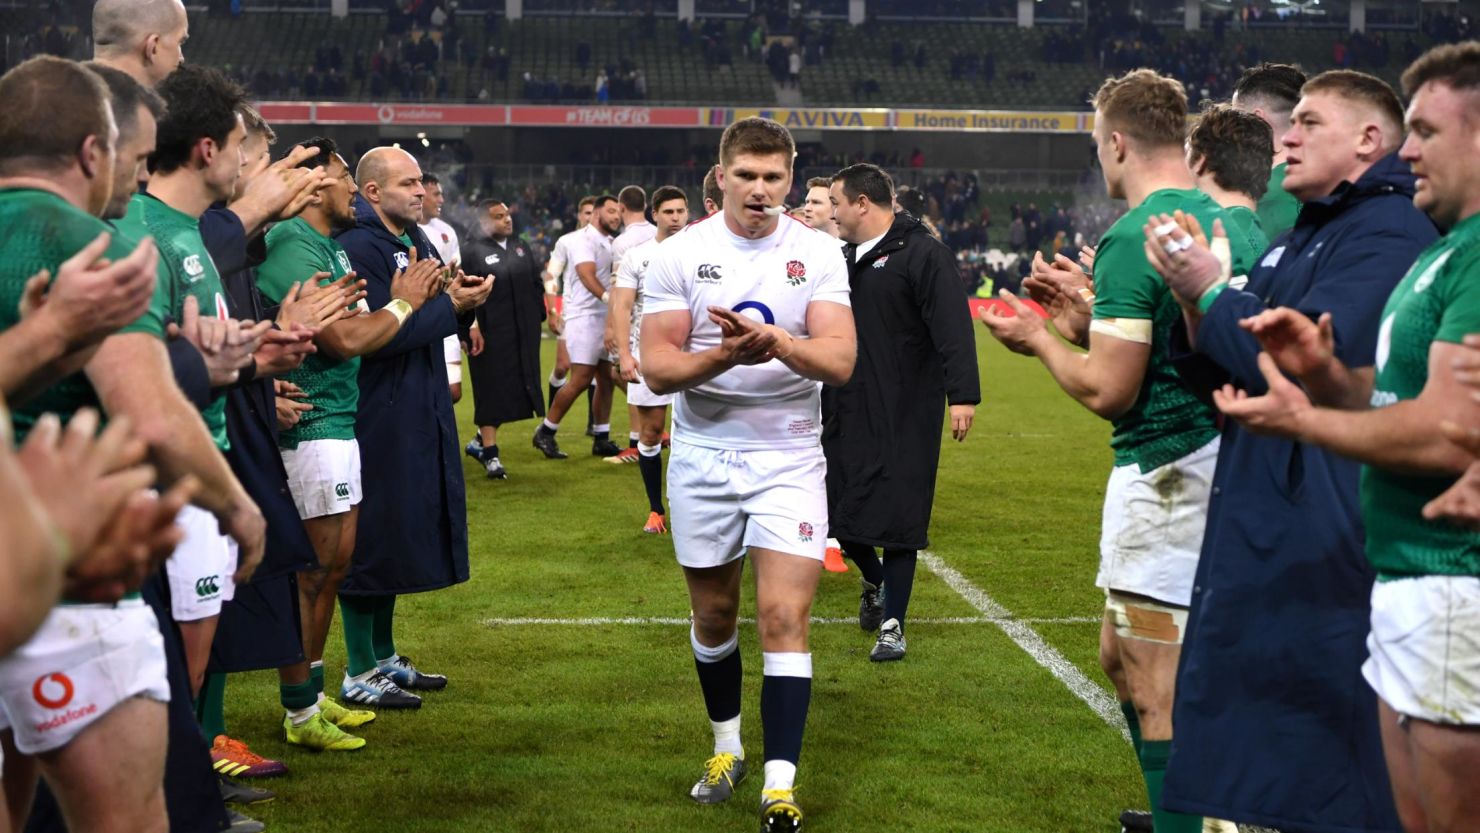 Owen Farrell of England leads his side off the field following the Guinness Six Nations between Ireland and England at Aviva Stadium on February 2, 2019 in Dublin, Ireland. Farrell scored three conversions for the win. 